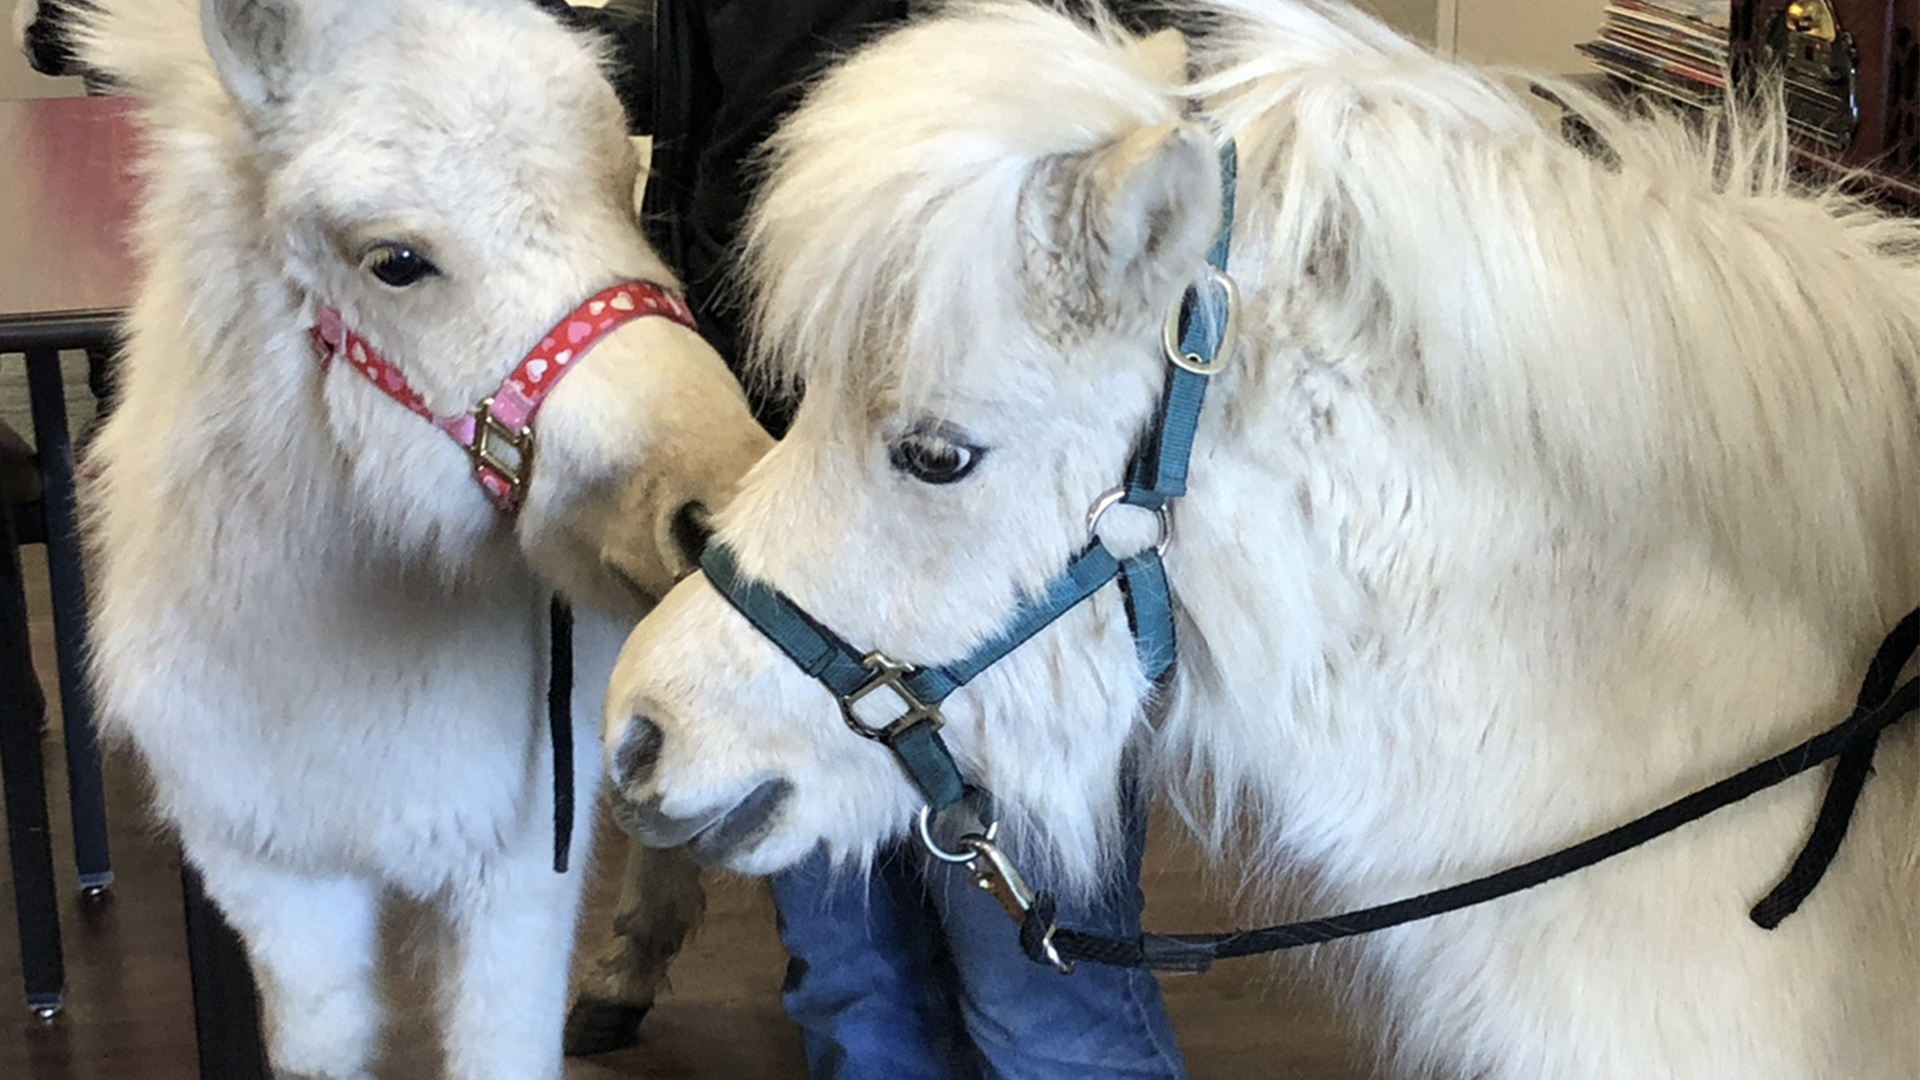 Visit by Miniature Horses Generates Maximum Affection Among Residents